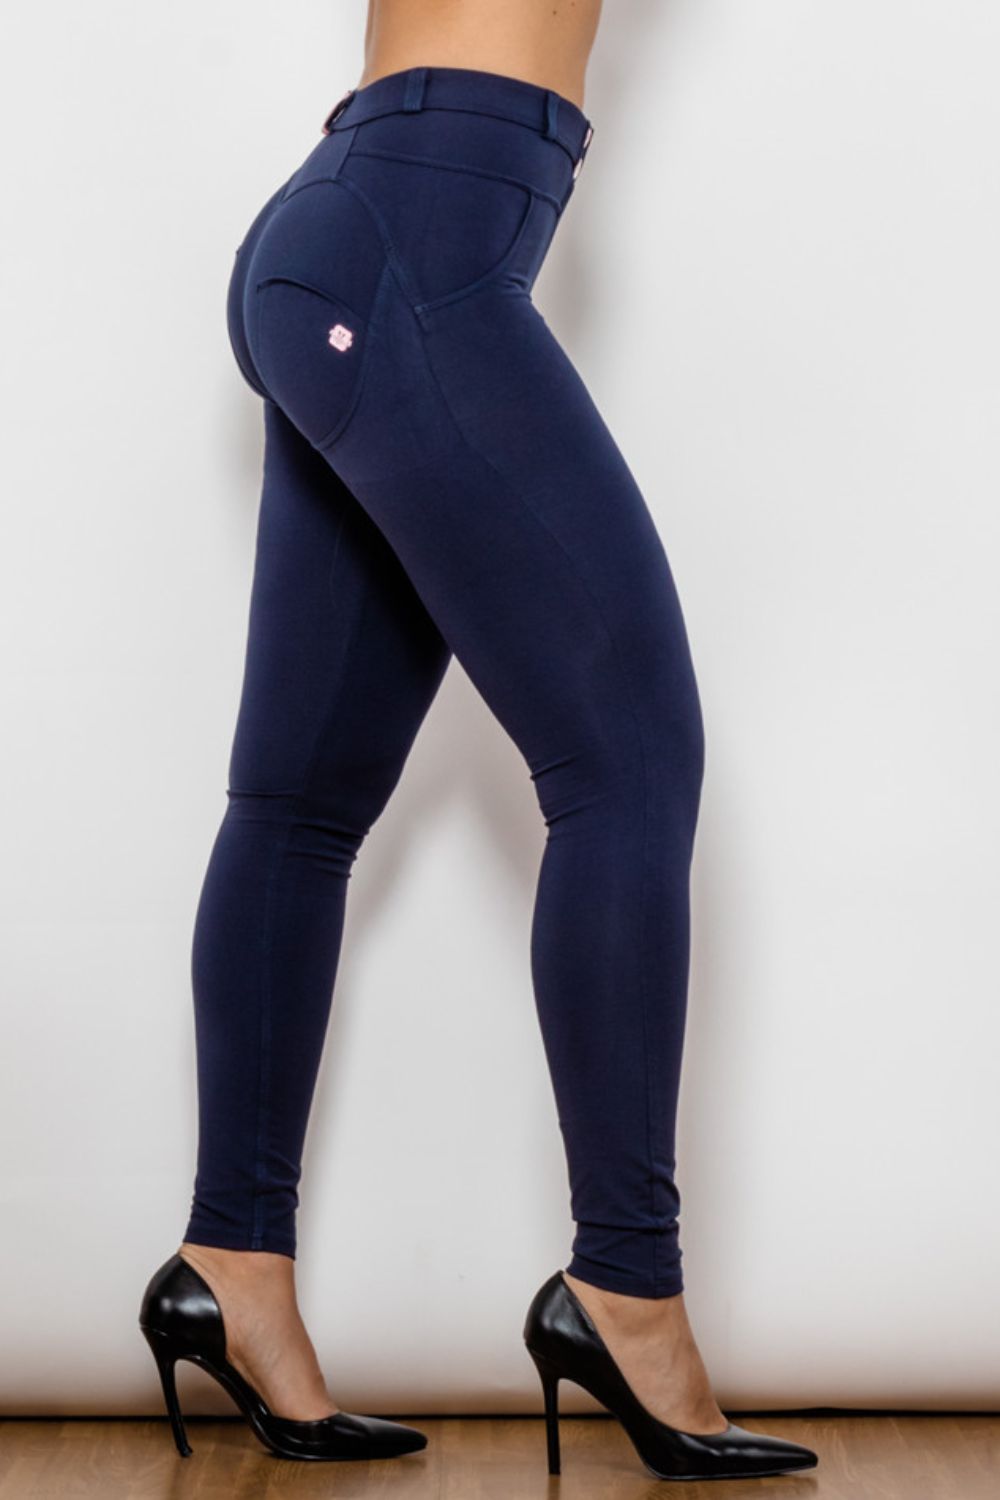 Buttoned Skinny Long Jeans Print on any thing USA/STOD clothes